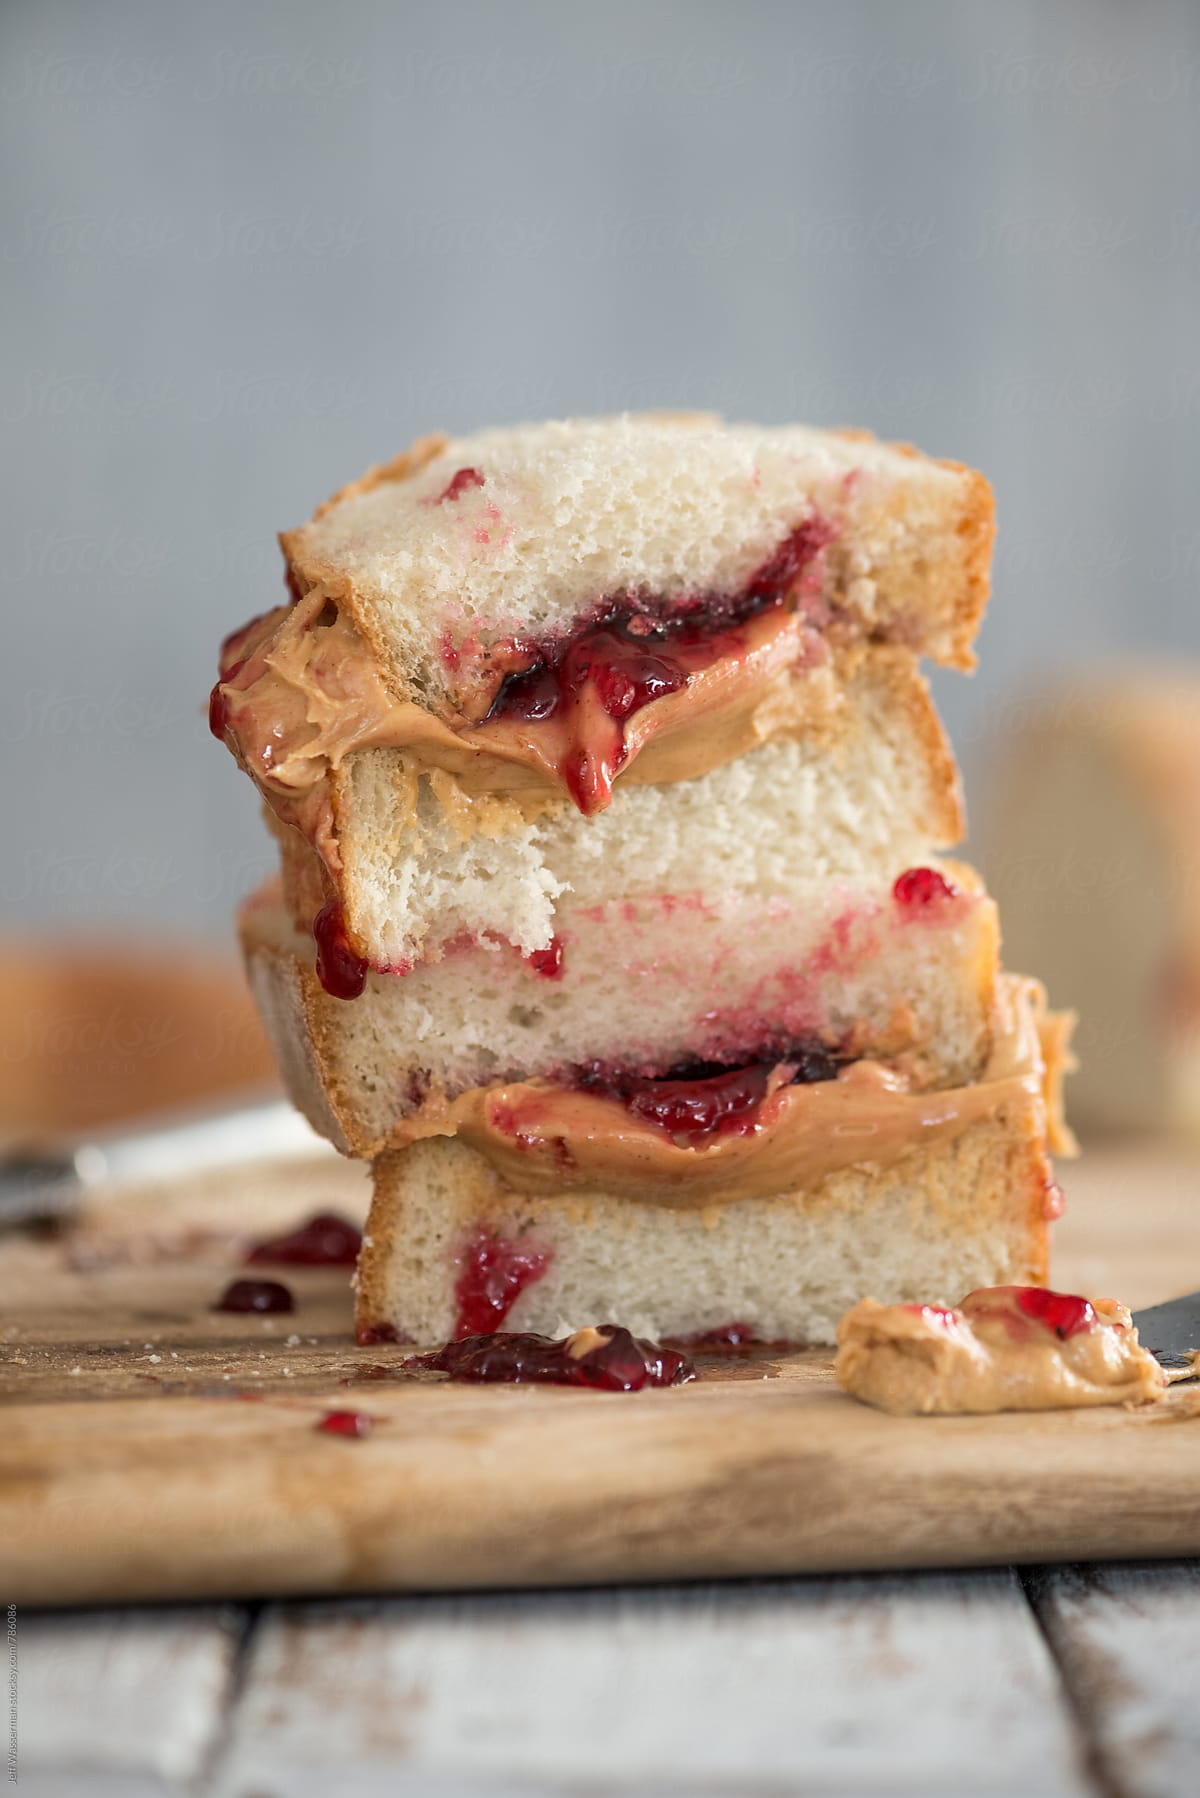 Messy Peanut Butter and Jelly Sandwich